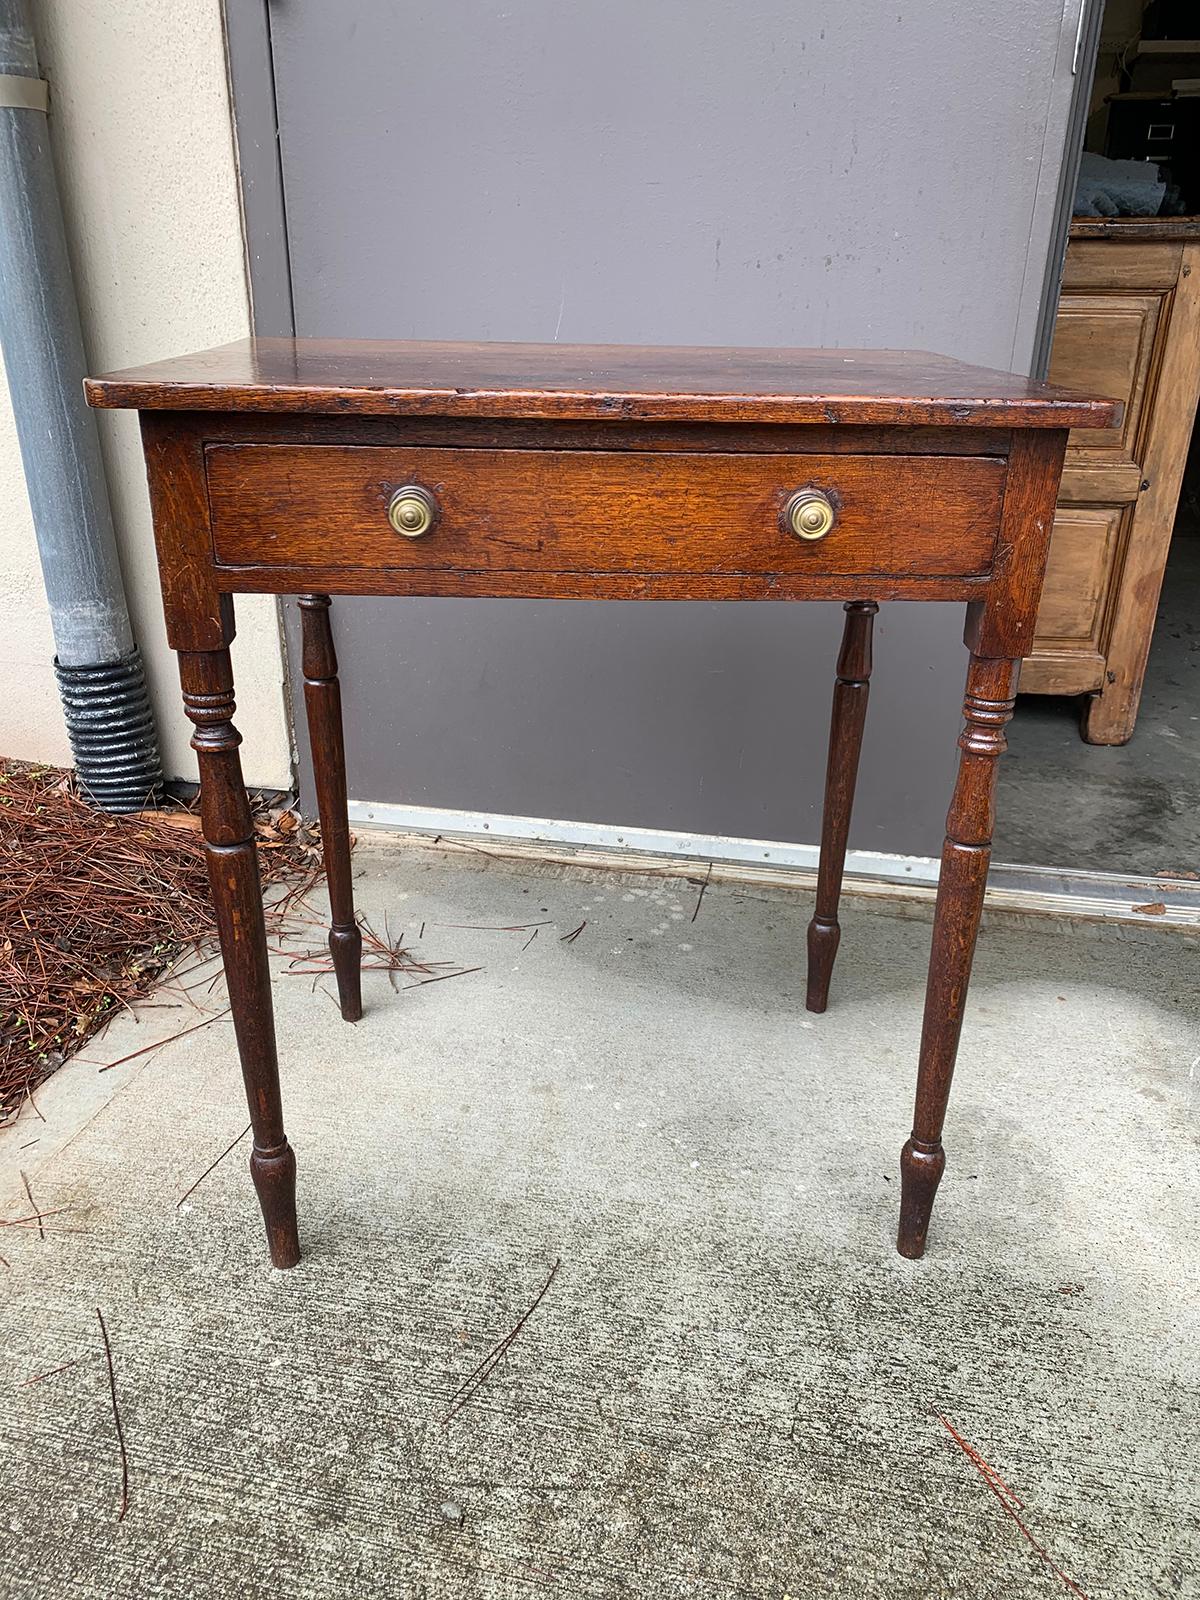 19th century English Regency oak table with one drawer.